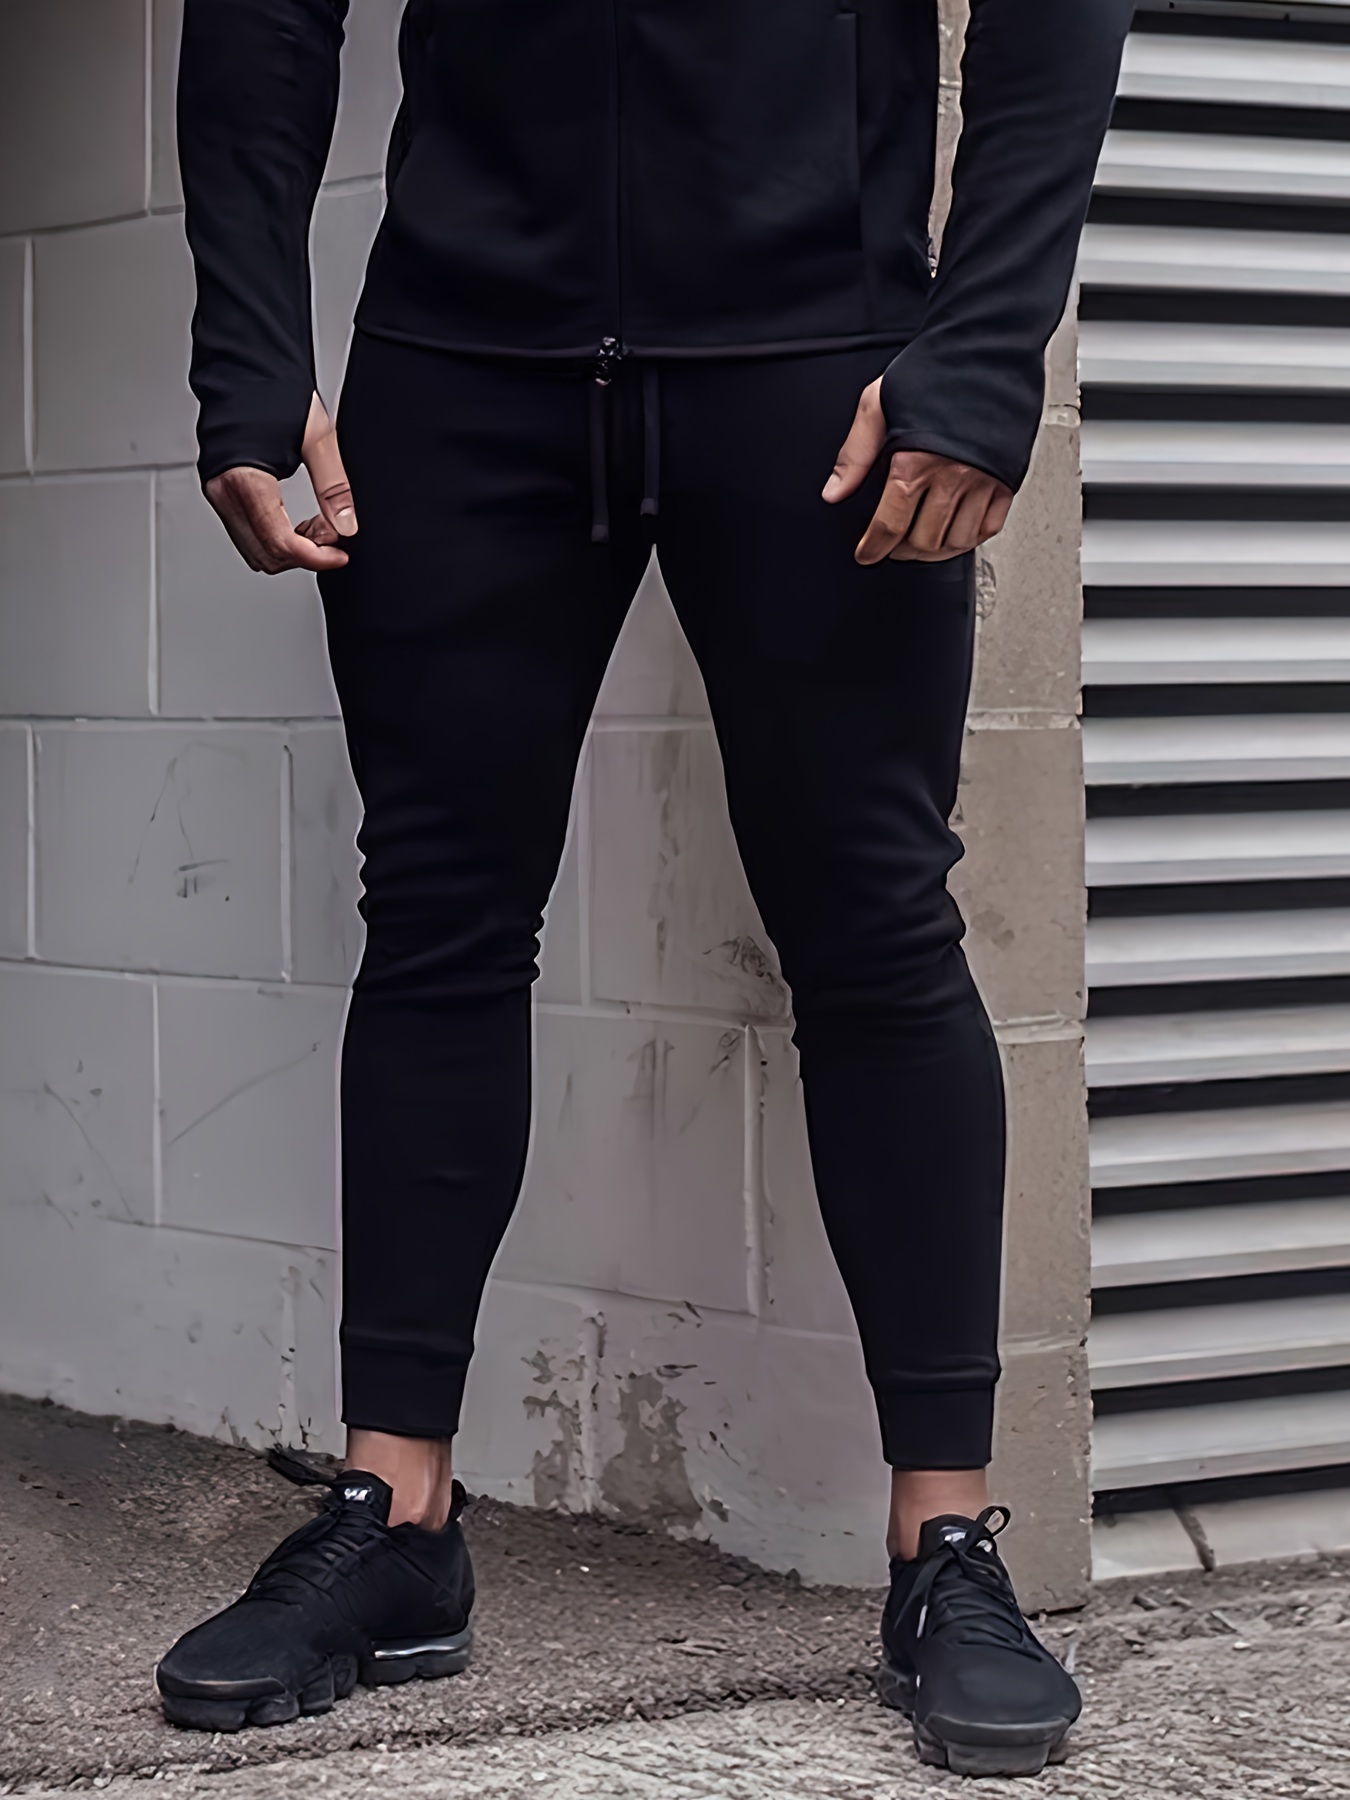 Man Active Gym Tapered Sweatpants